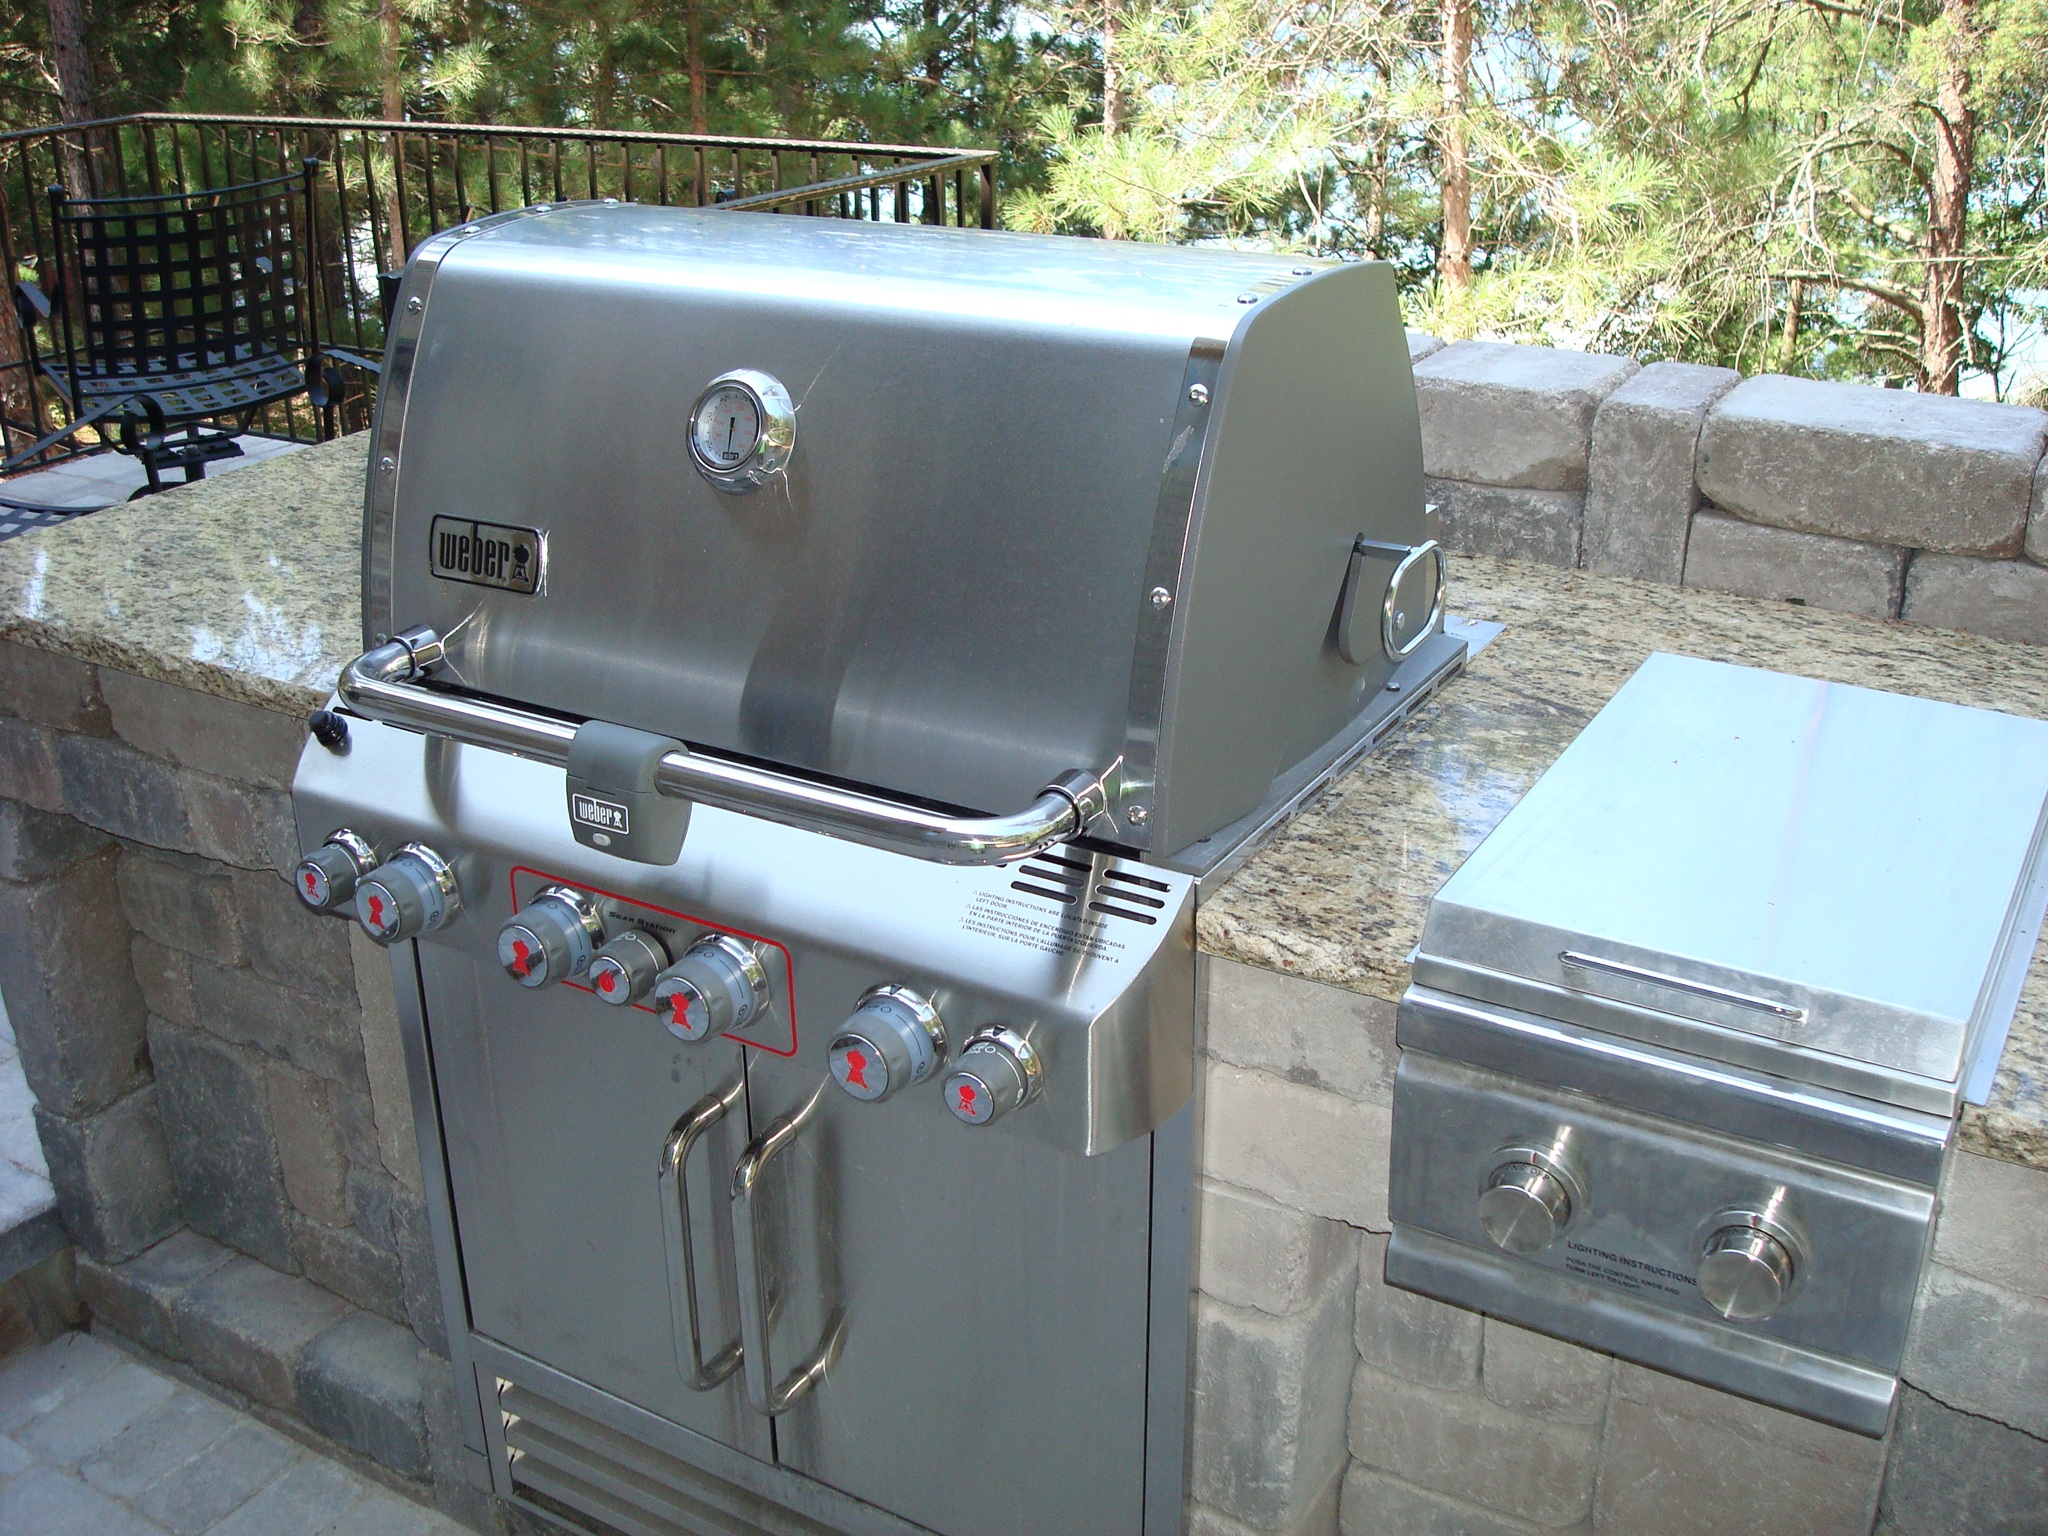 close-up of grill in an outdoor kitchen